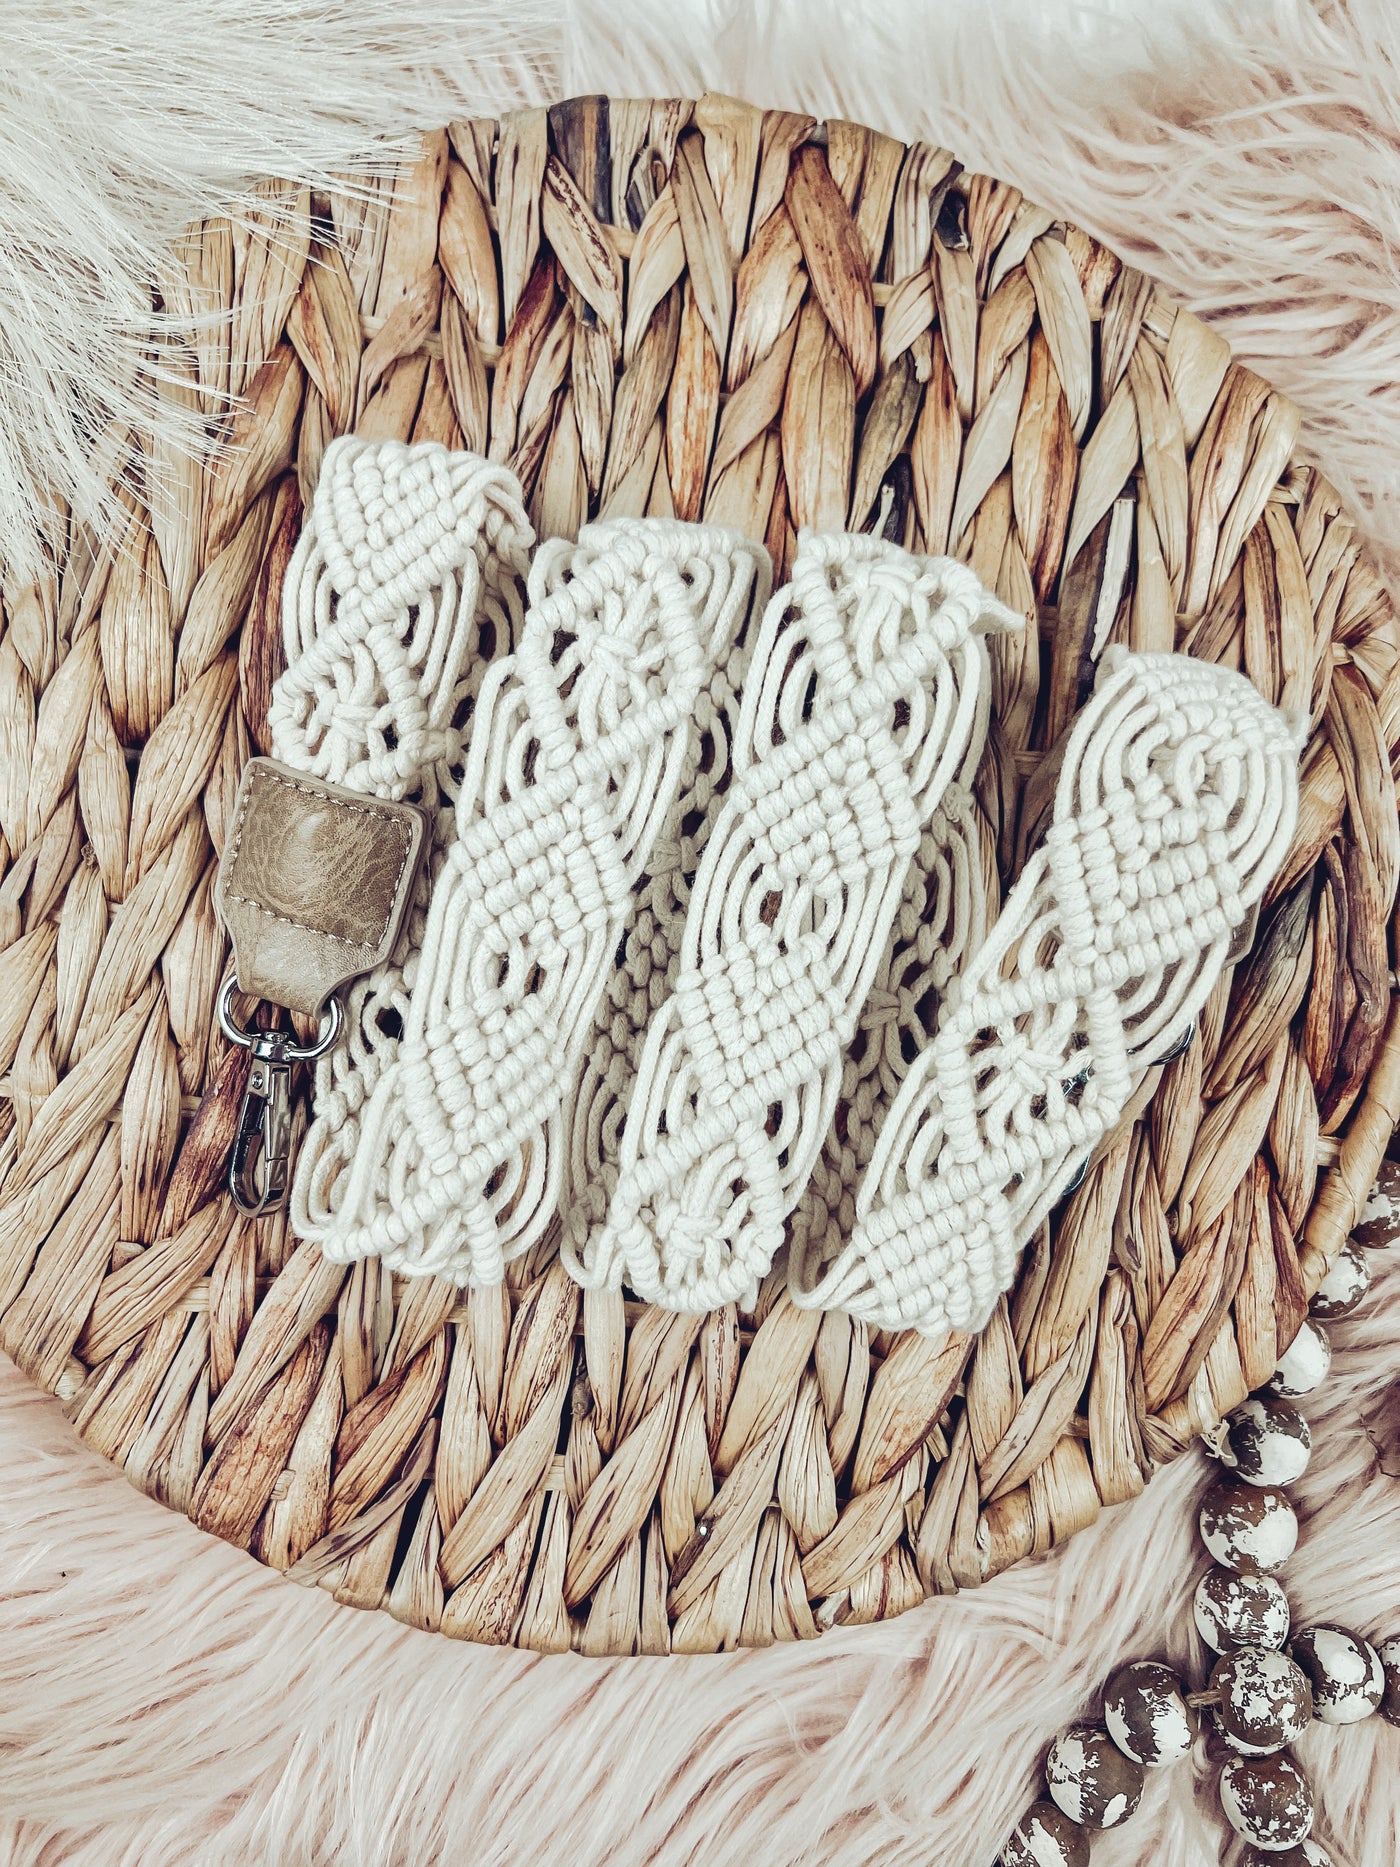 Macrame Woven Purse Strap - One left-201 BAGS, BELTS, HATS-J's World Trading - Harry Hines-Adelyn Elaine's Boutique, Women's Clothing Boutique in Gilmer, TX